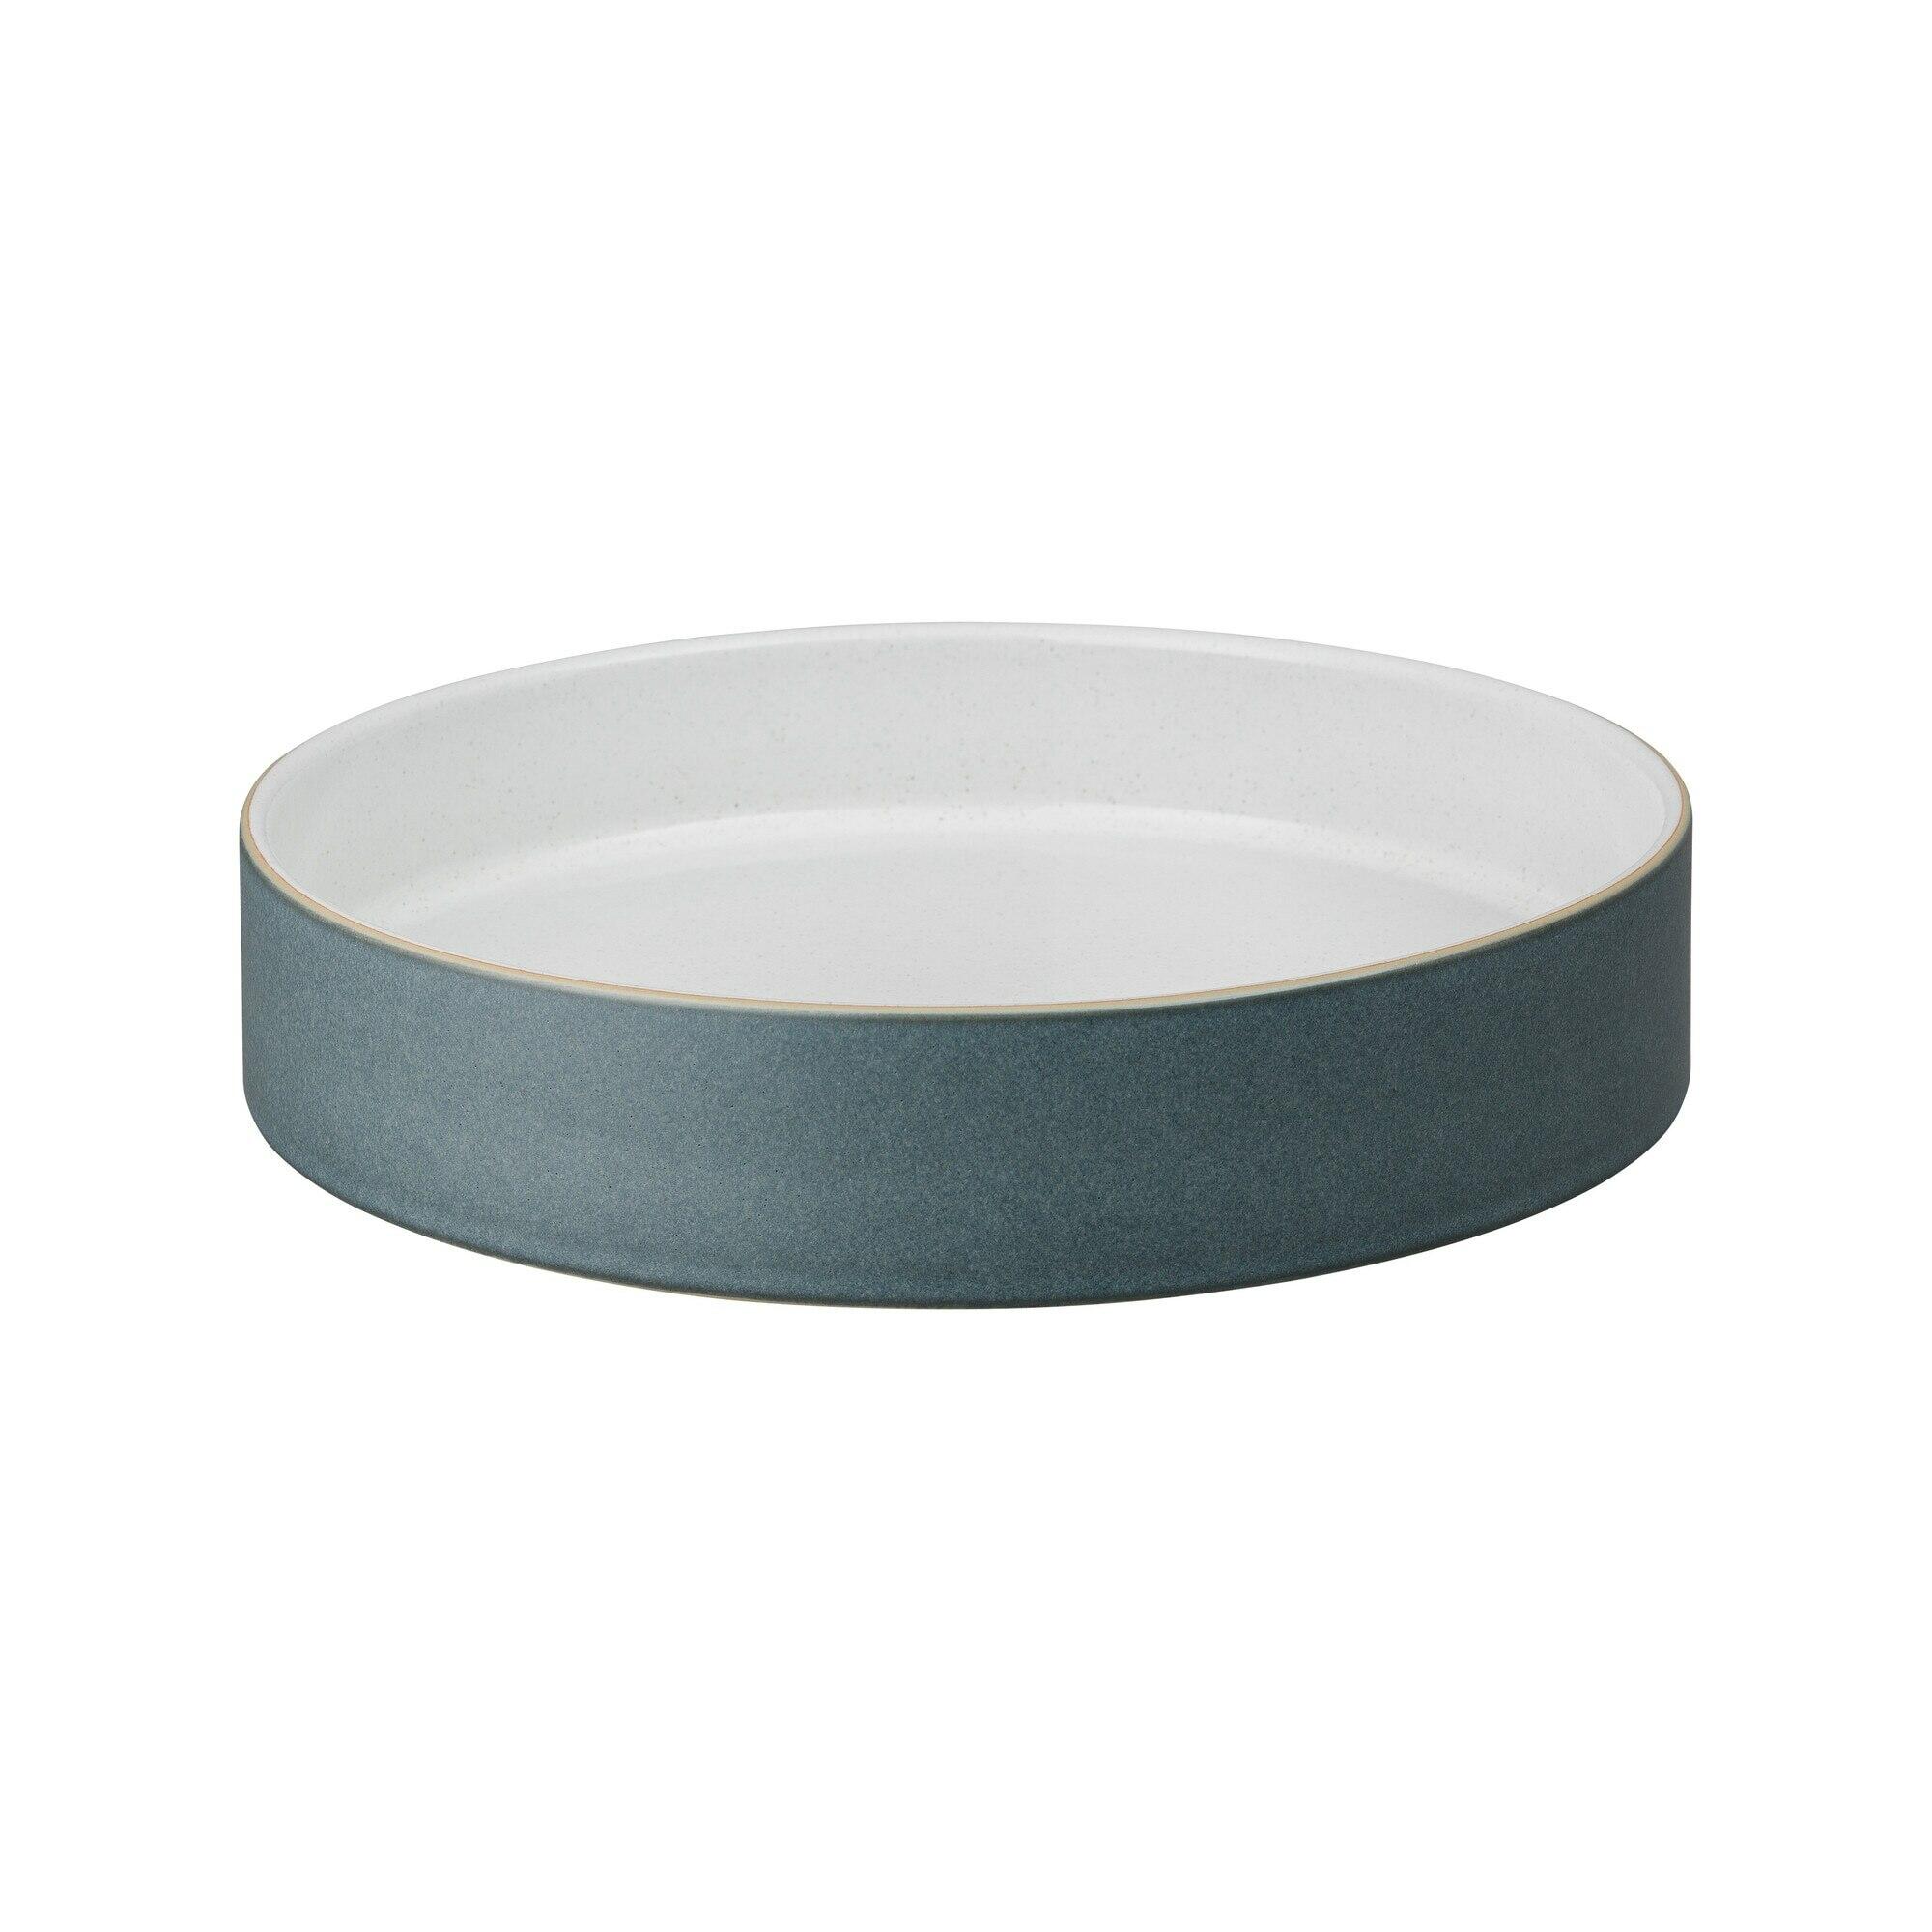 Impression Charcoal Blue Straight Round Tray